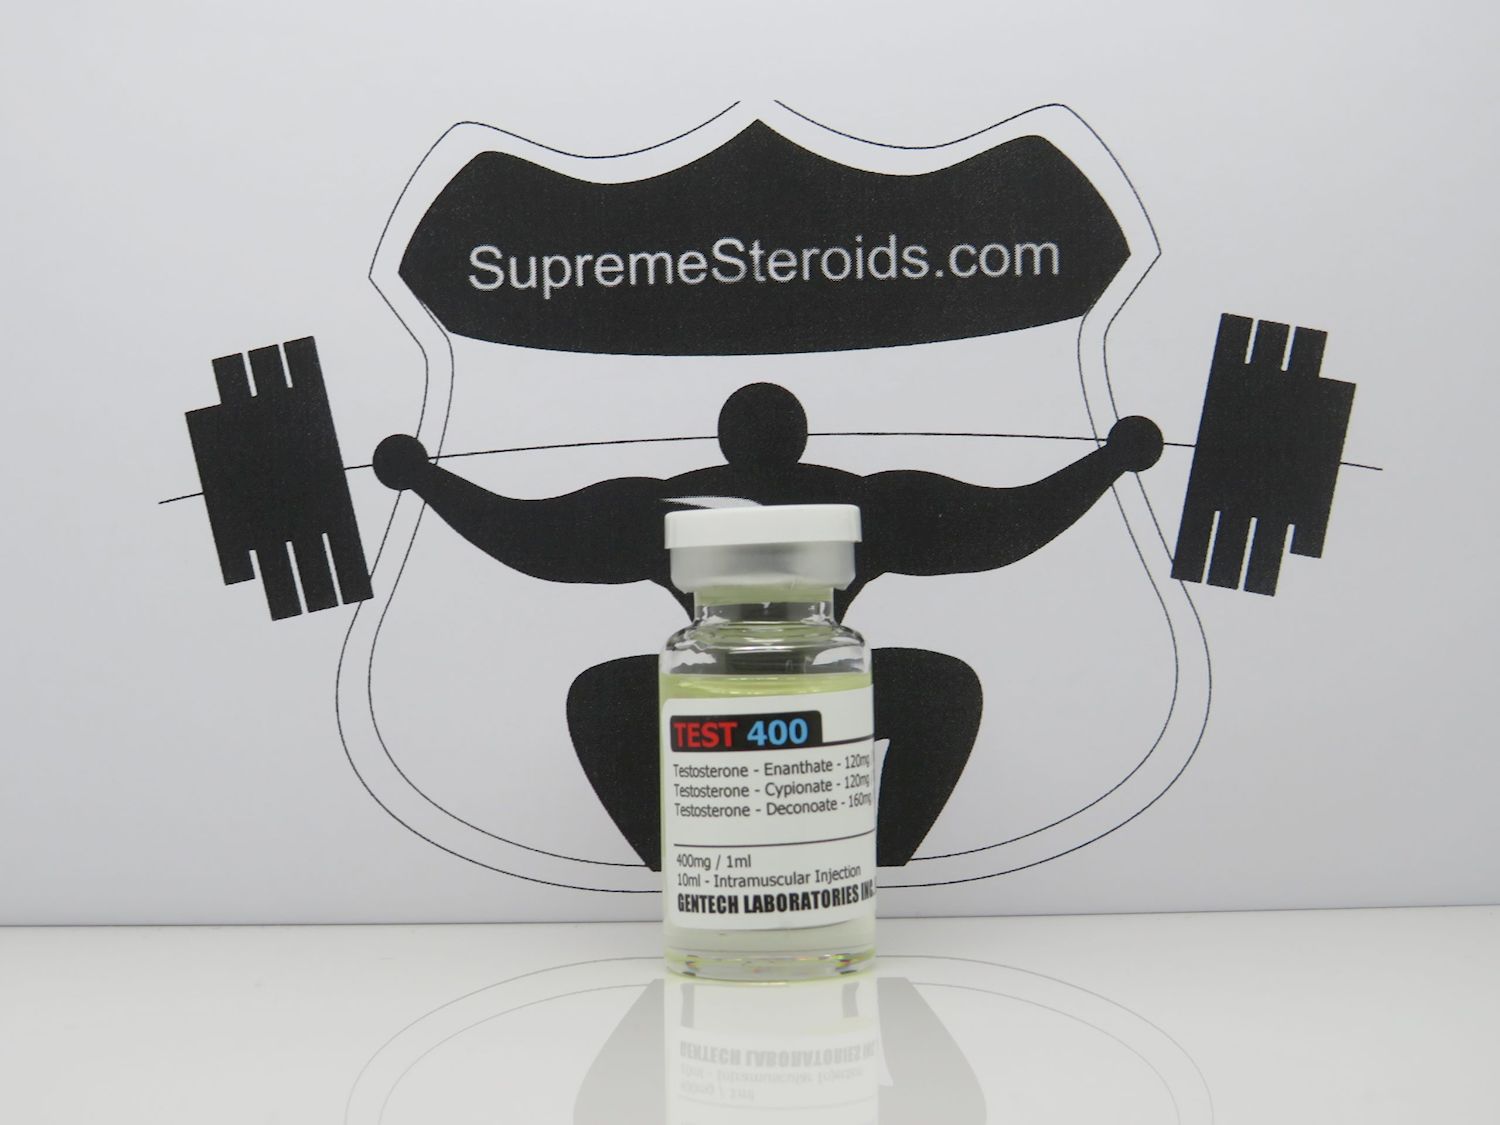 intravenous steroids Services - How To Do It Right